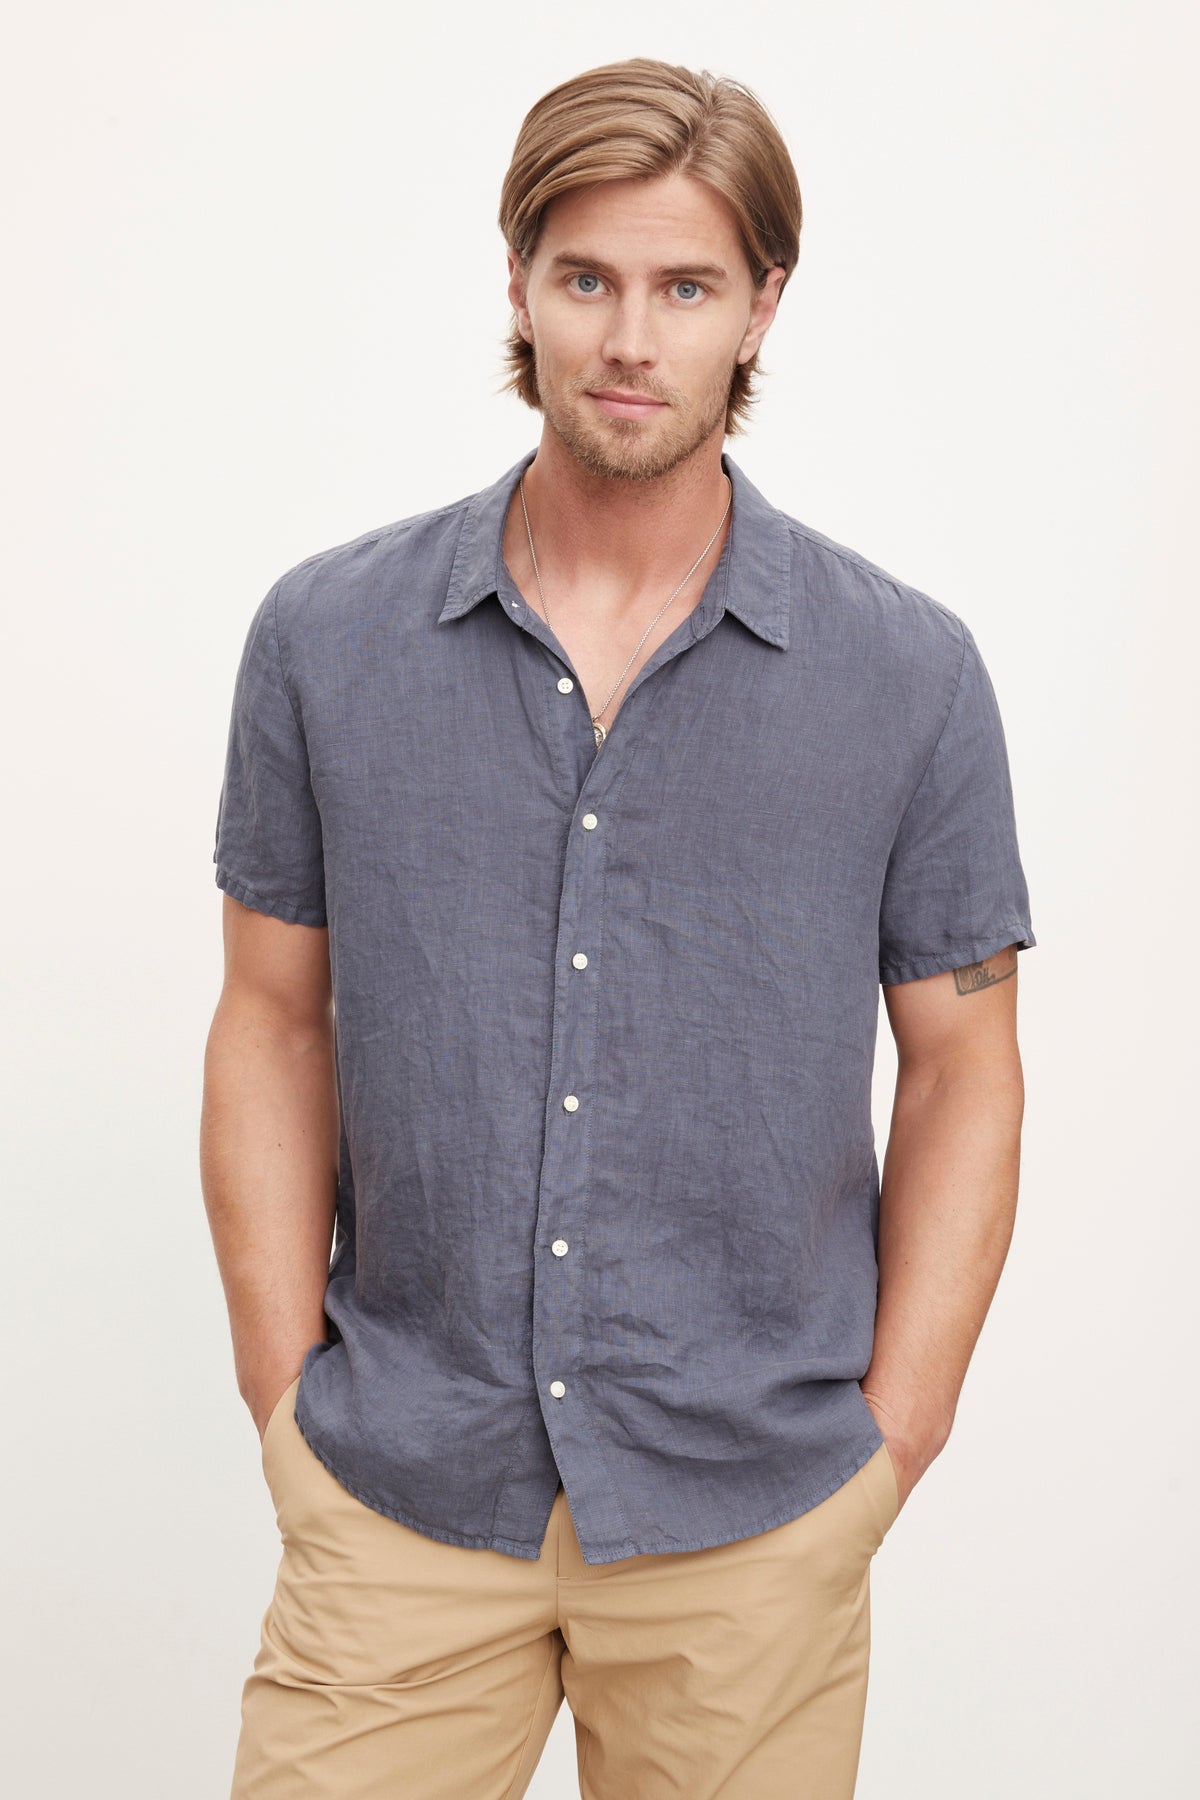 A man with shoulder-length hair stands with his hands in his pockets, wearing a short-sleeve MACKIE LINEN BUTTON-UP SHIRT by Velvet by Graham & Spencer and tan pants, perfect for a summer wardrobe.-36918691561665